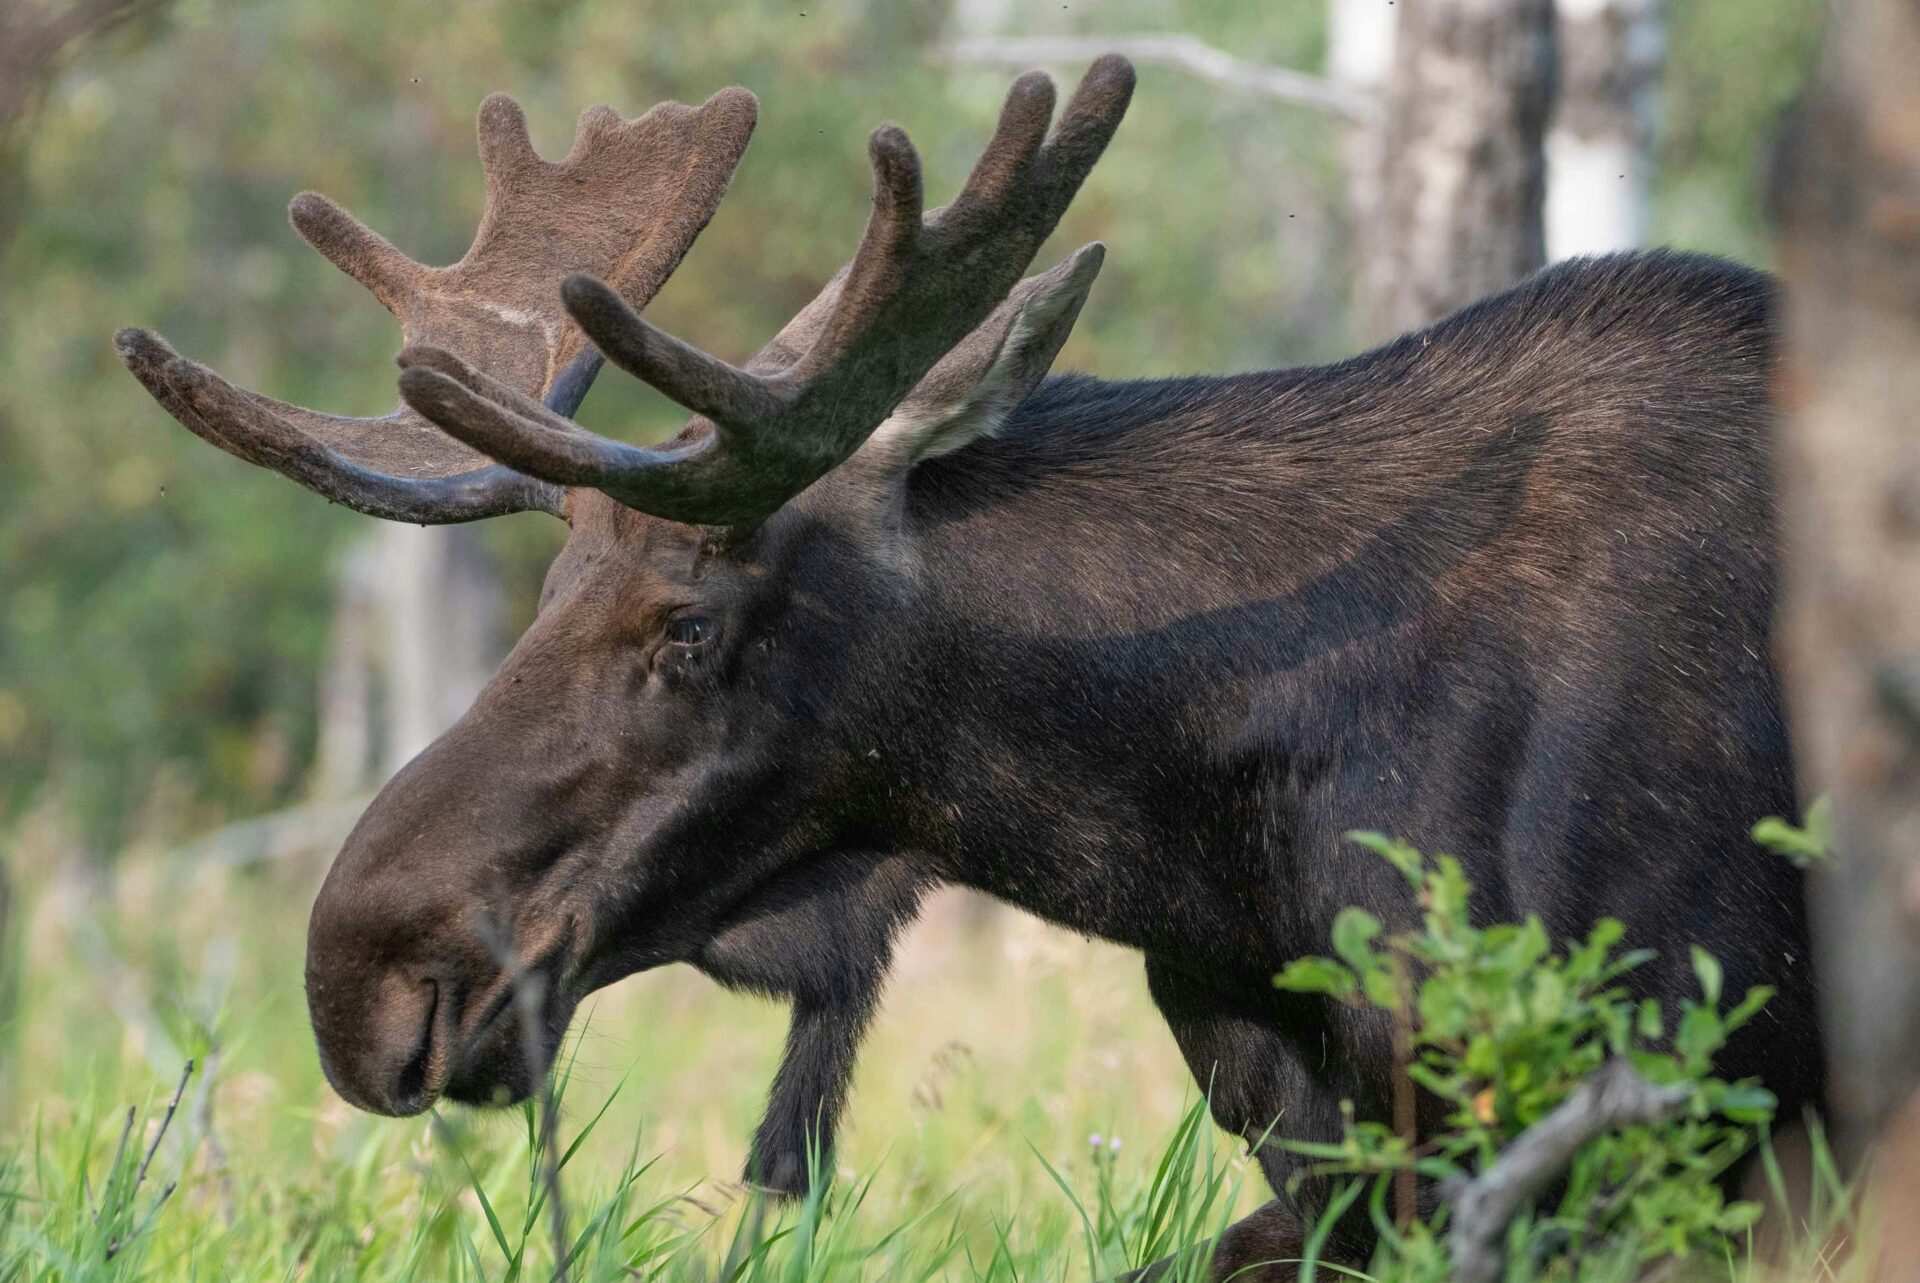 Dark colored moose under a tree, surrounded by greenery in Cypress Hills, Canada